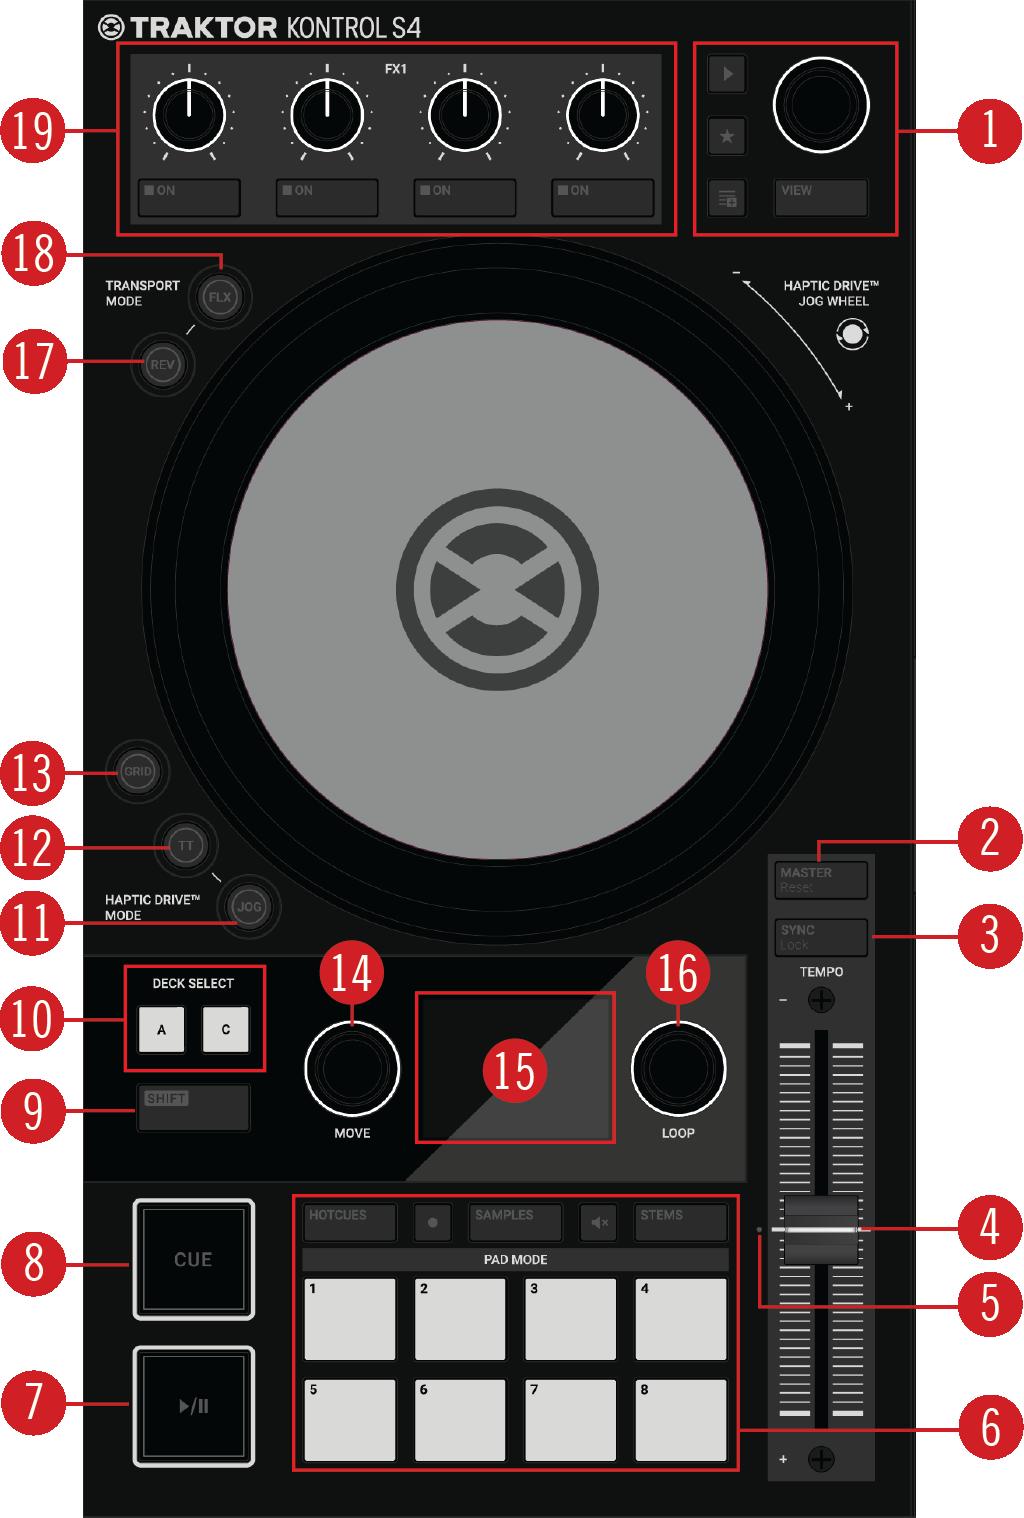 TRAKTOR KONTROL S4 Overview 5.1. Decks TRAKTOR KONTROL S4 provides you with two physical Decks to control the TRAKTOR Decks. Each Deck provides you with the following control elements: S4 Deck.